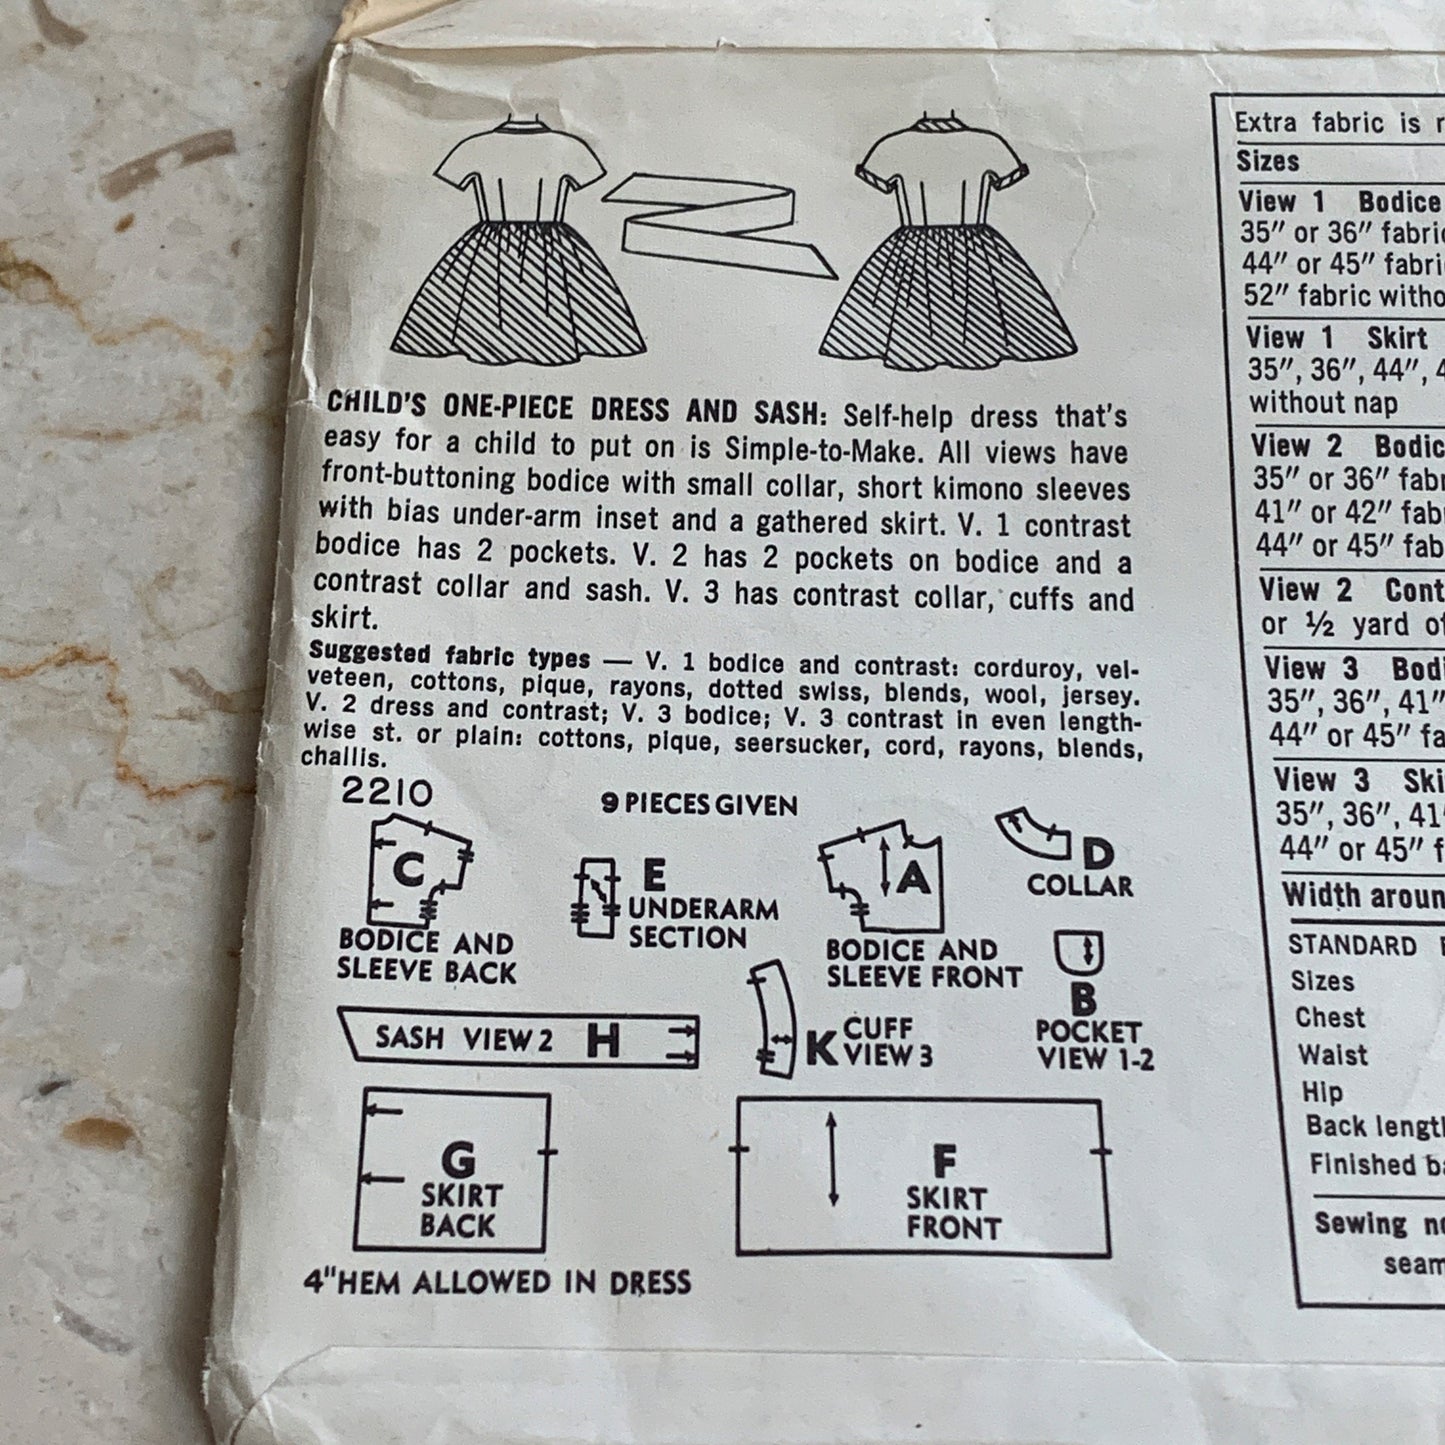 Girl’s Size 6 Short Sleeved Dress Vintage Sewing Pattern Simplicity 2210